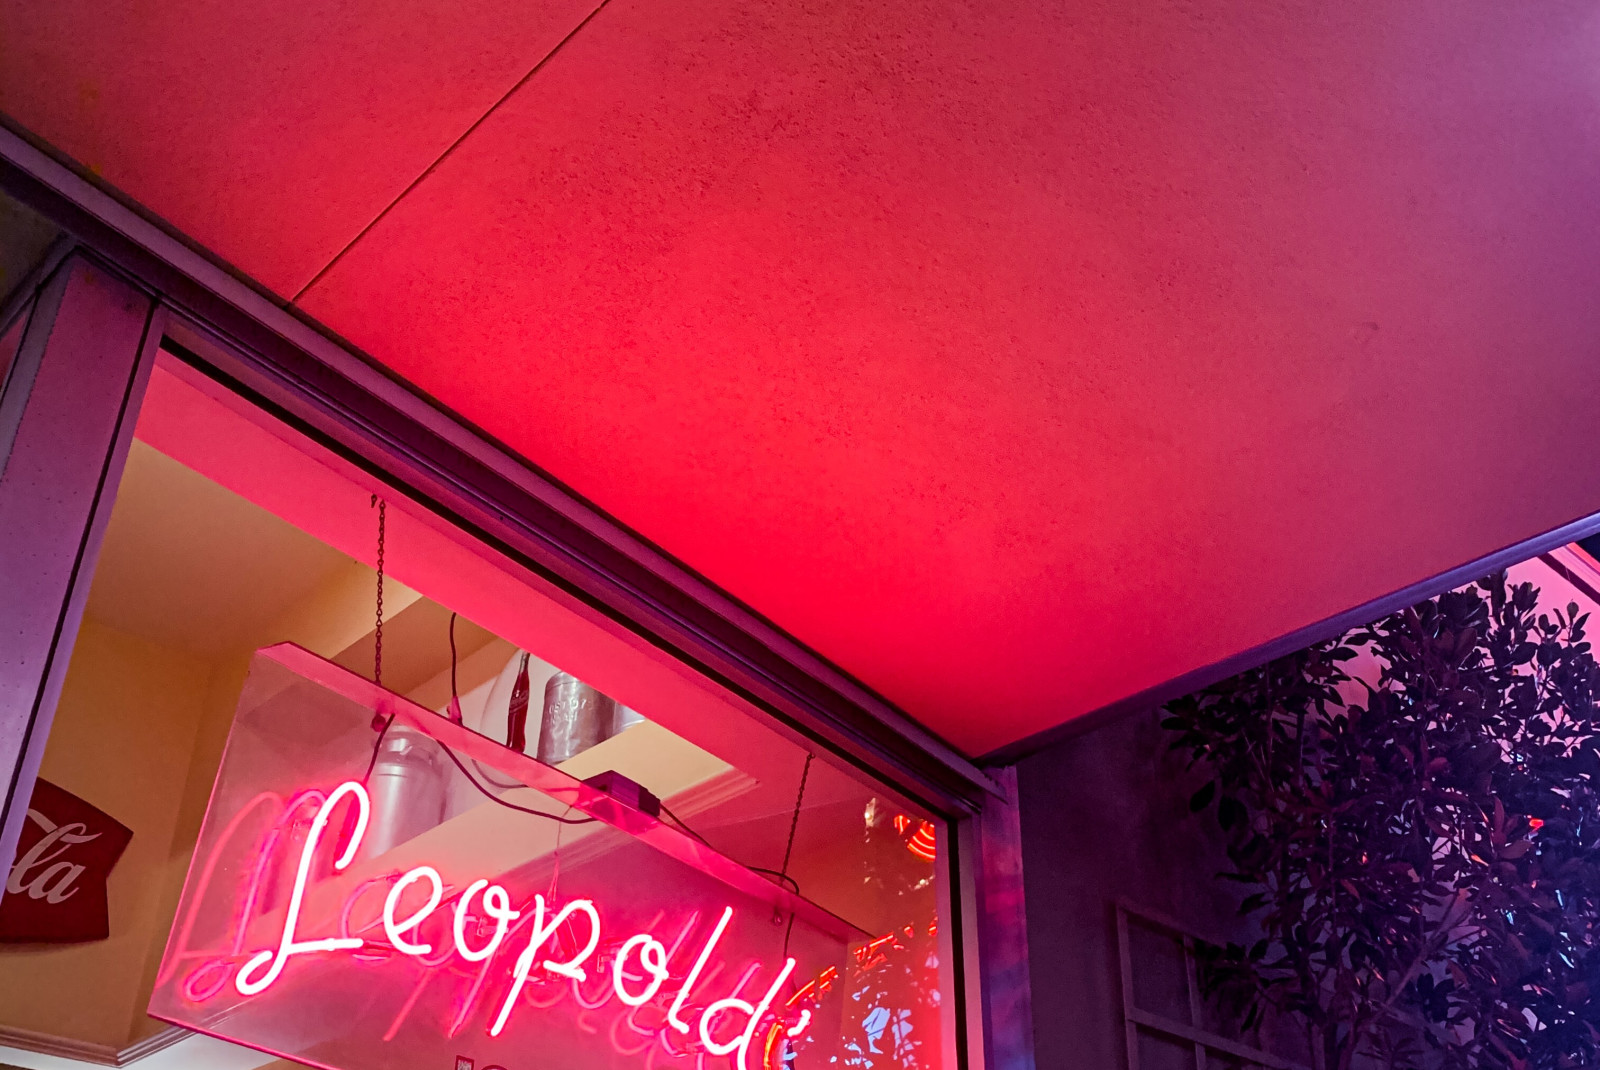 A pink neon sign that reads 'Leopold's Ice Cream' on a glass window with 20 brown wooden frames with white photographs inside, hung on a yellow wall.